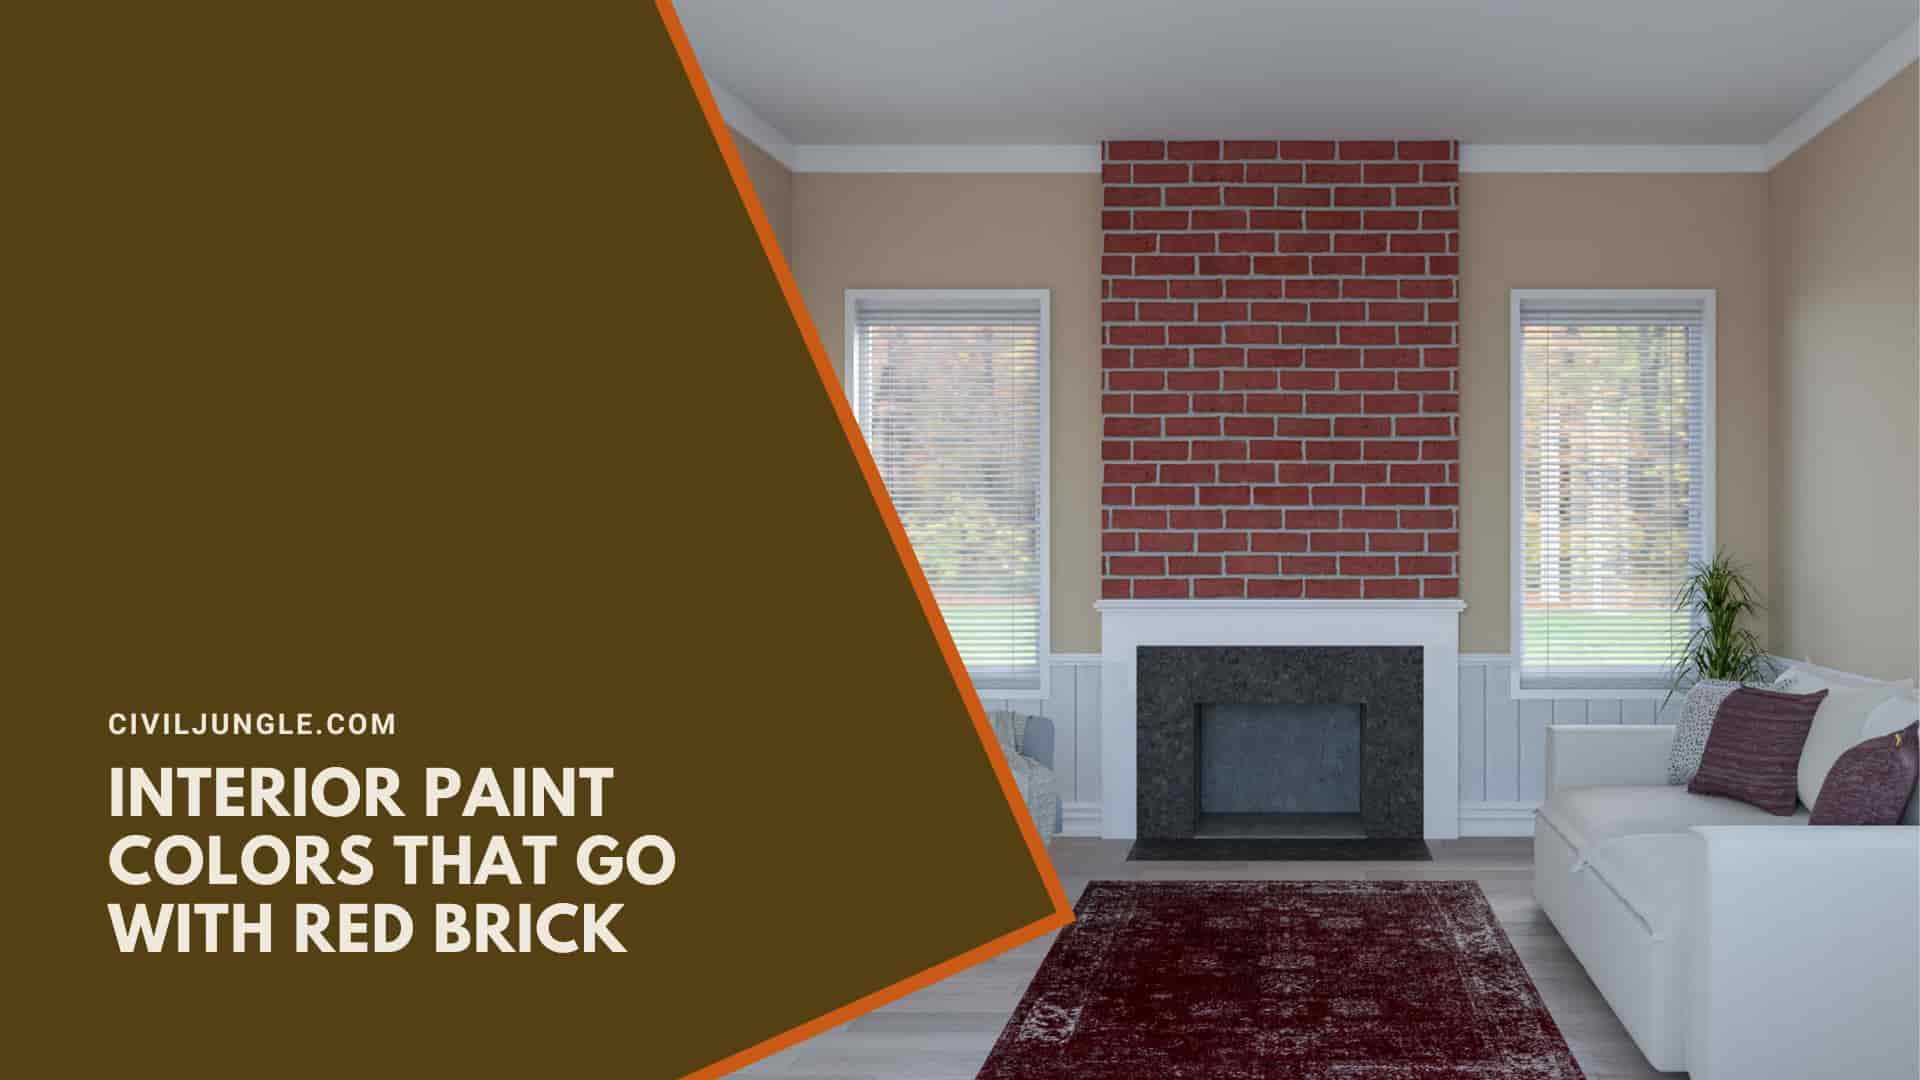 Interior Paint Colors That Go with Red Brick